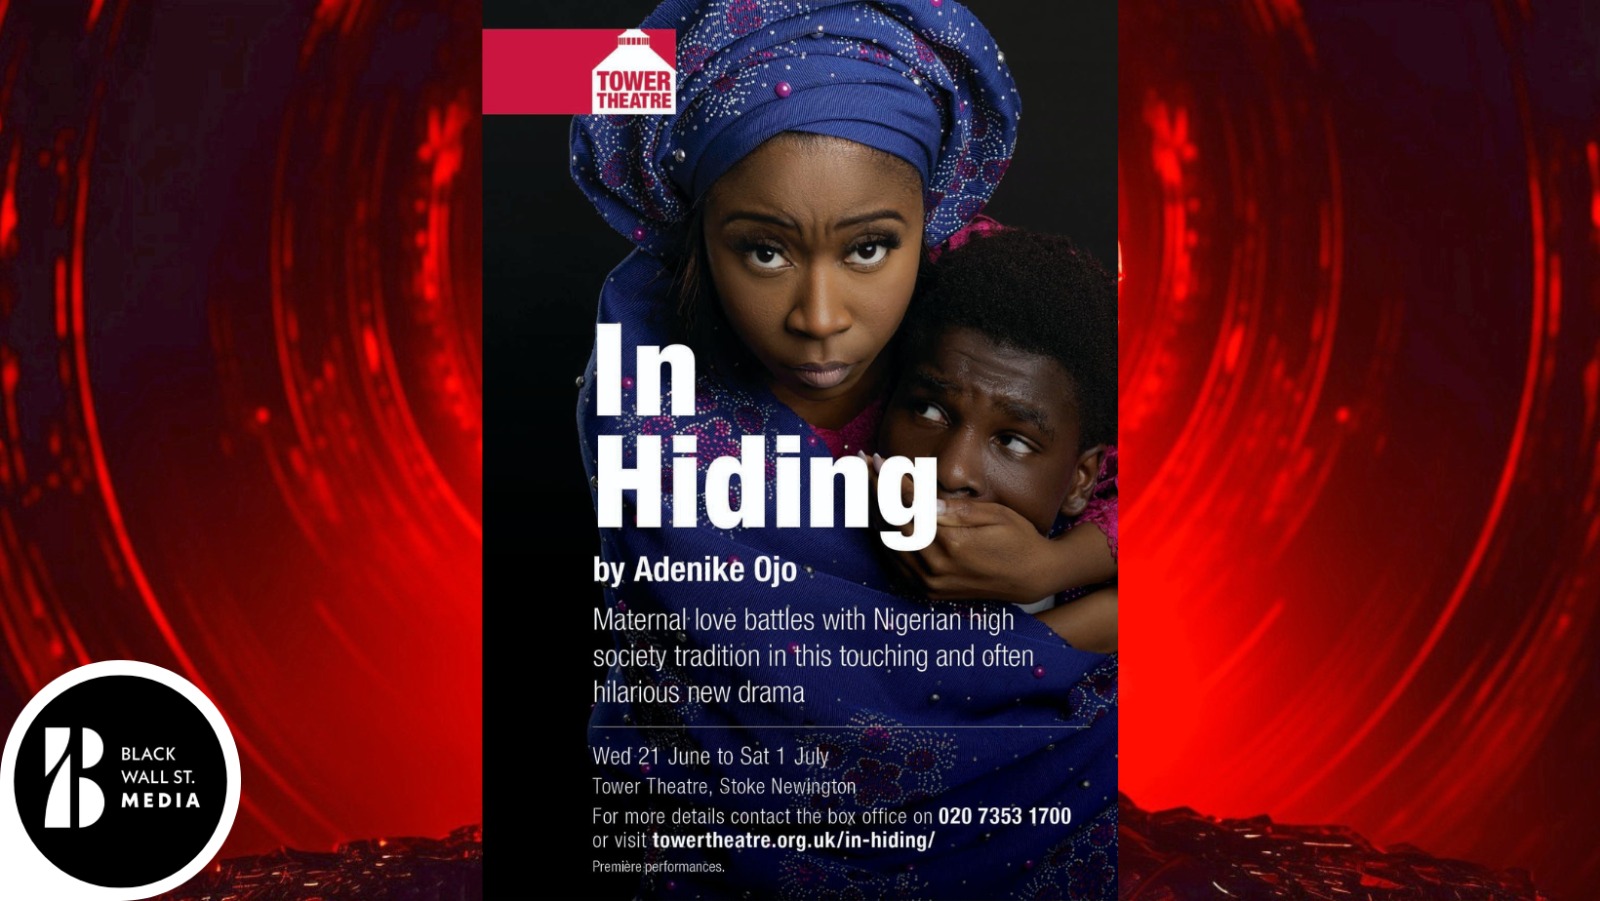 In Hiding: A Captivating New Play by Adenike Ojo